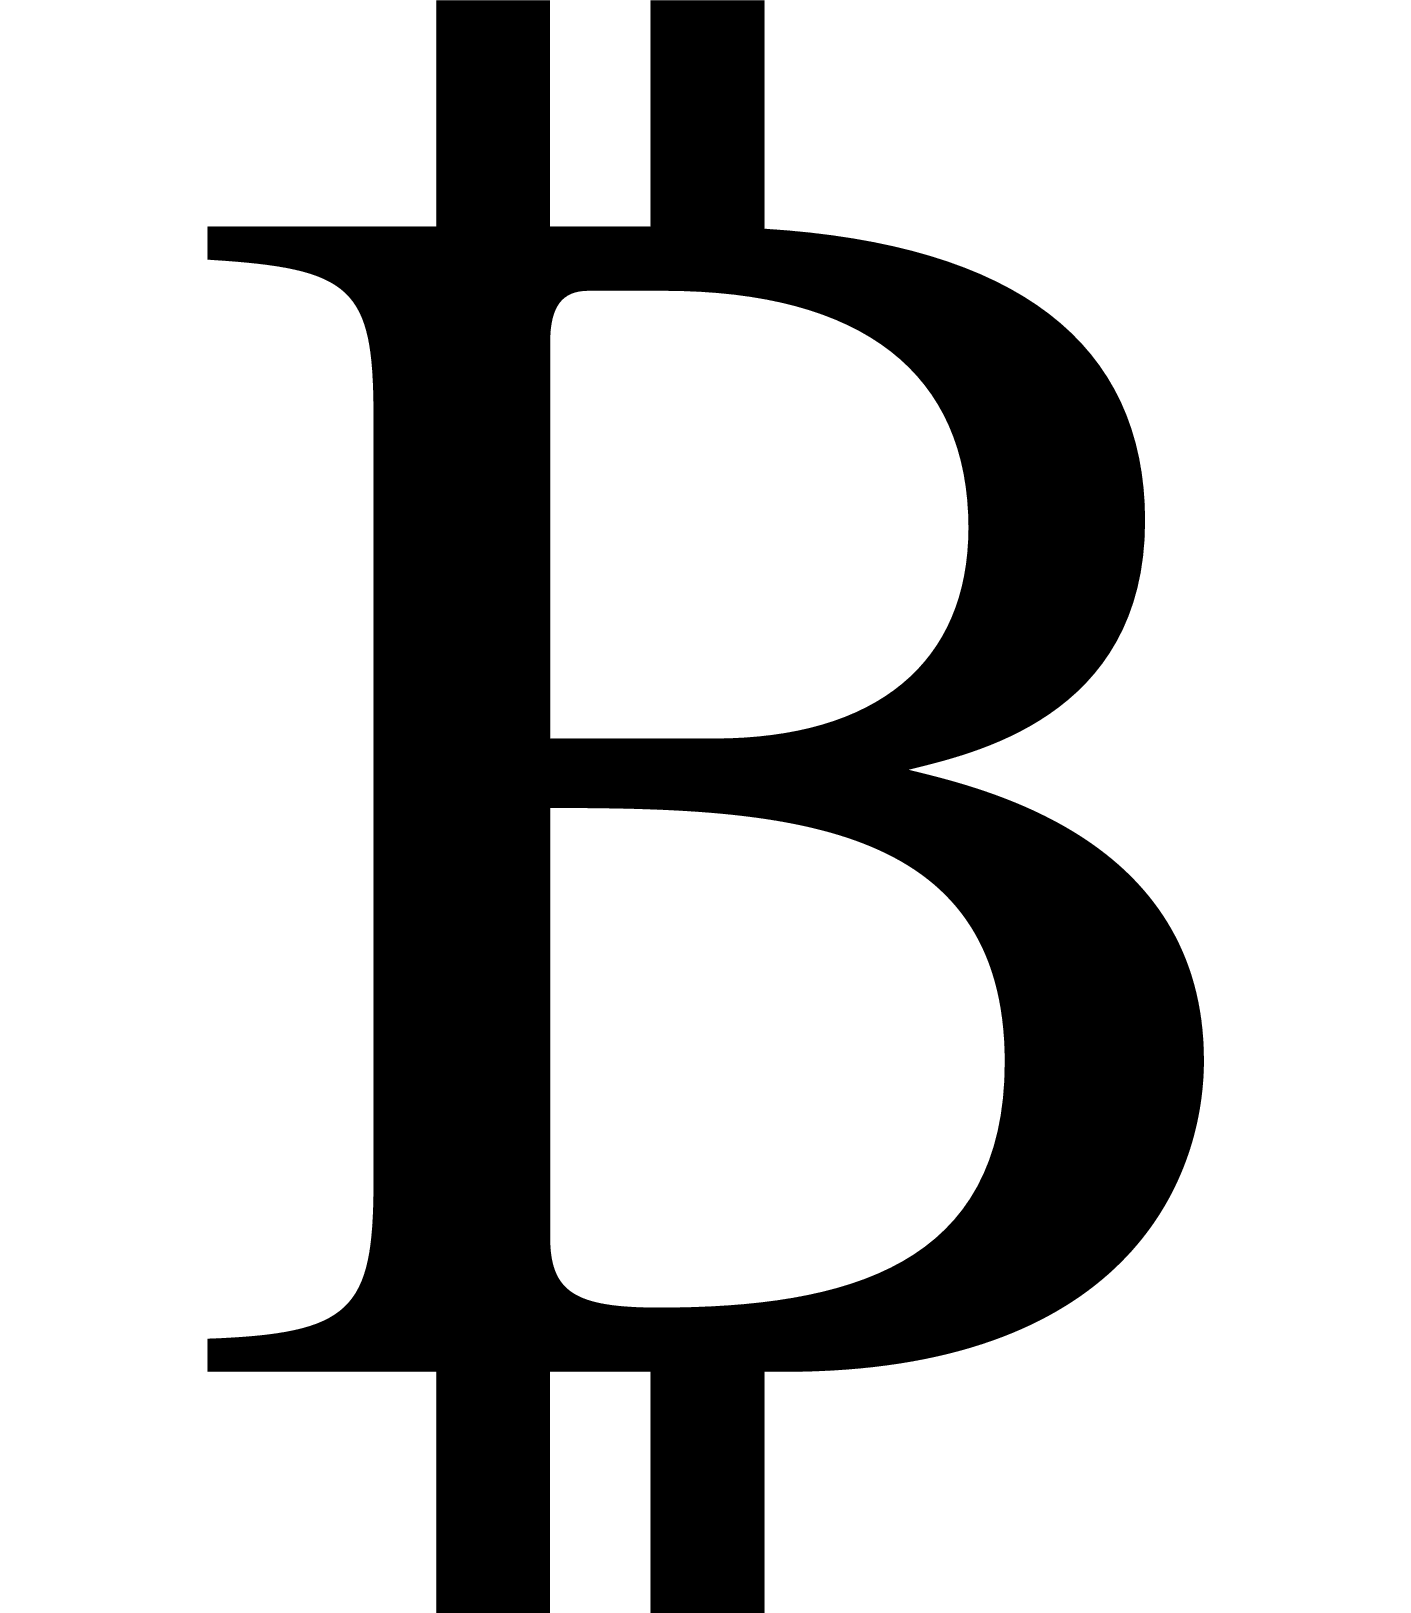 Futures Number Design Square Bitcoin PNG